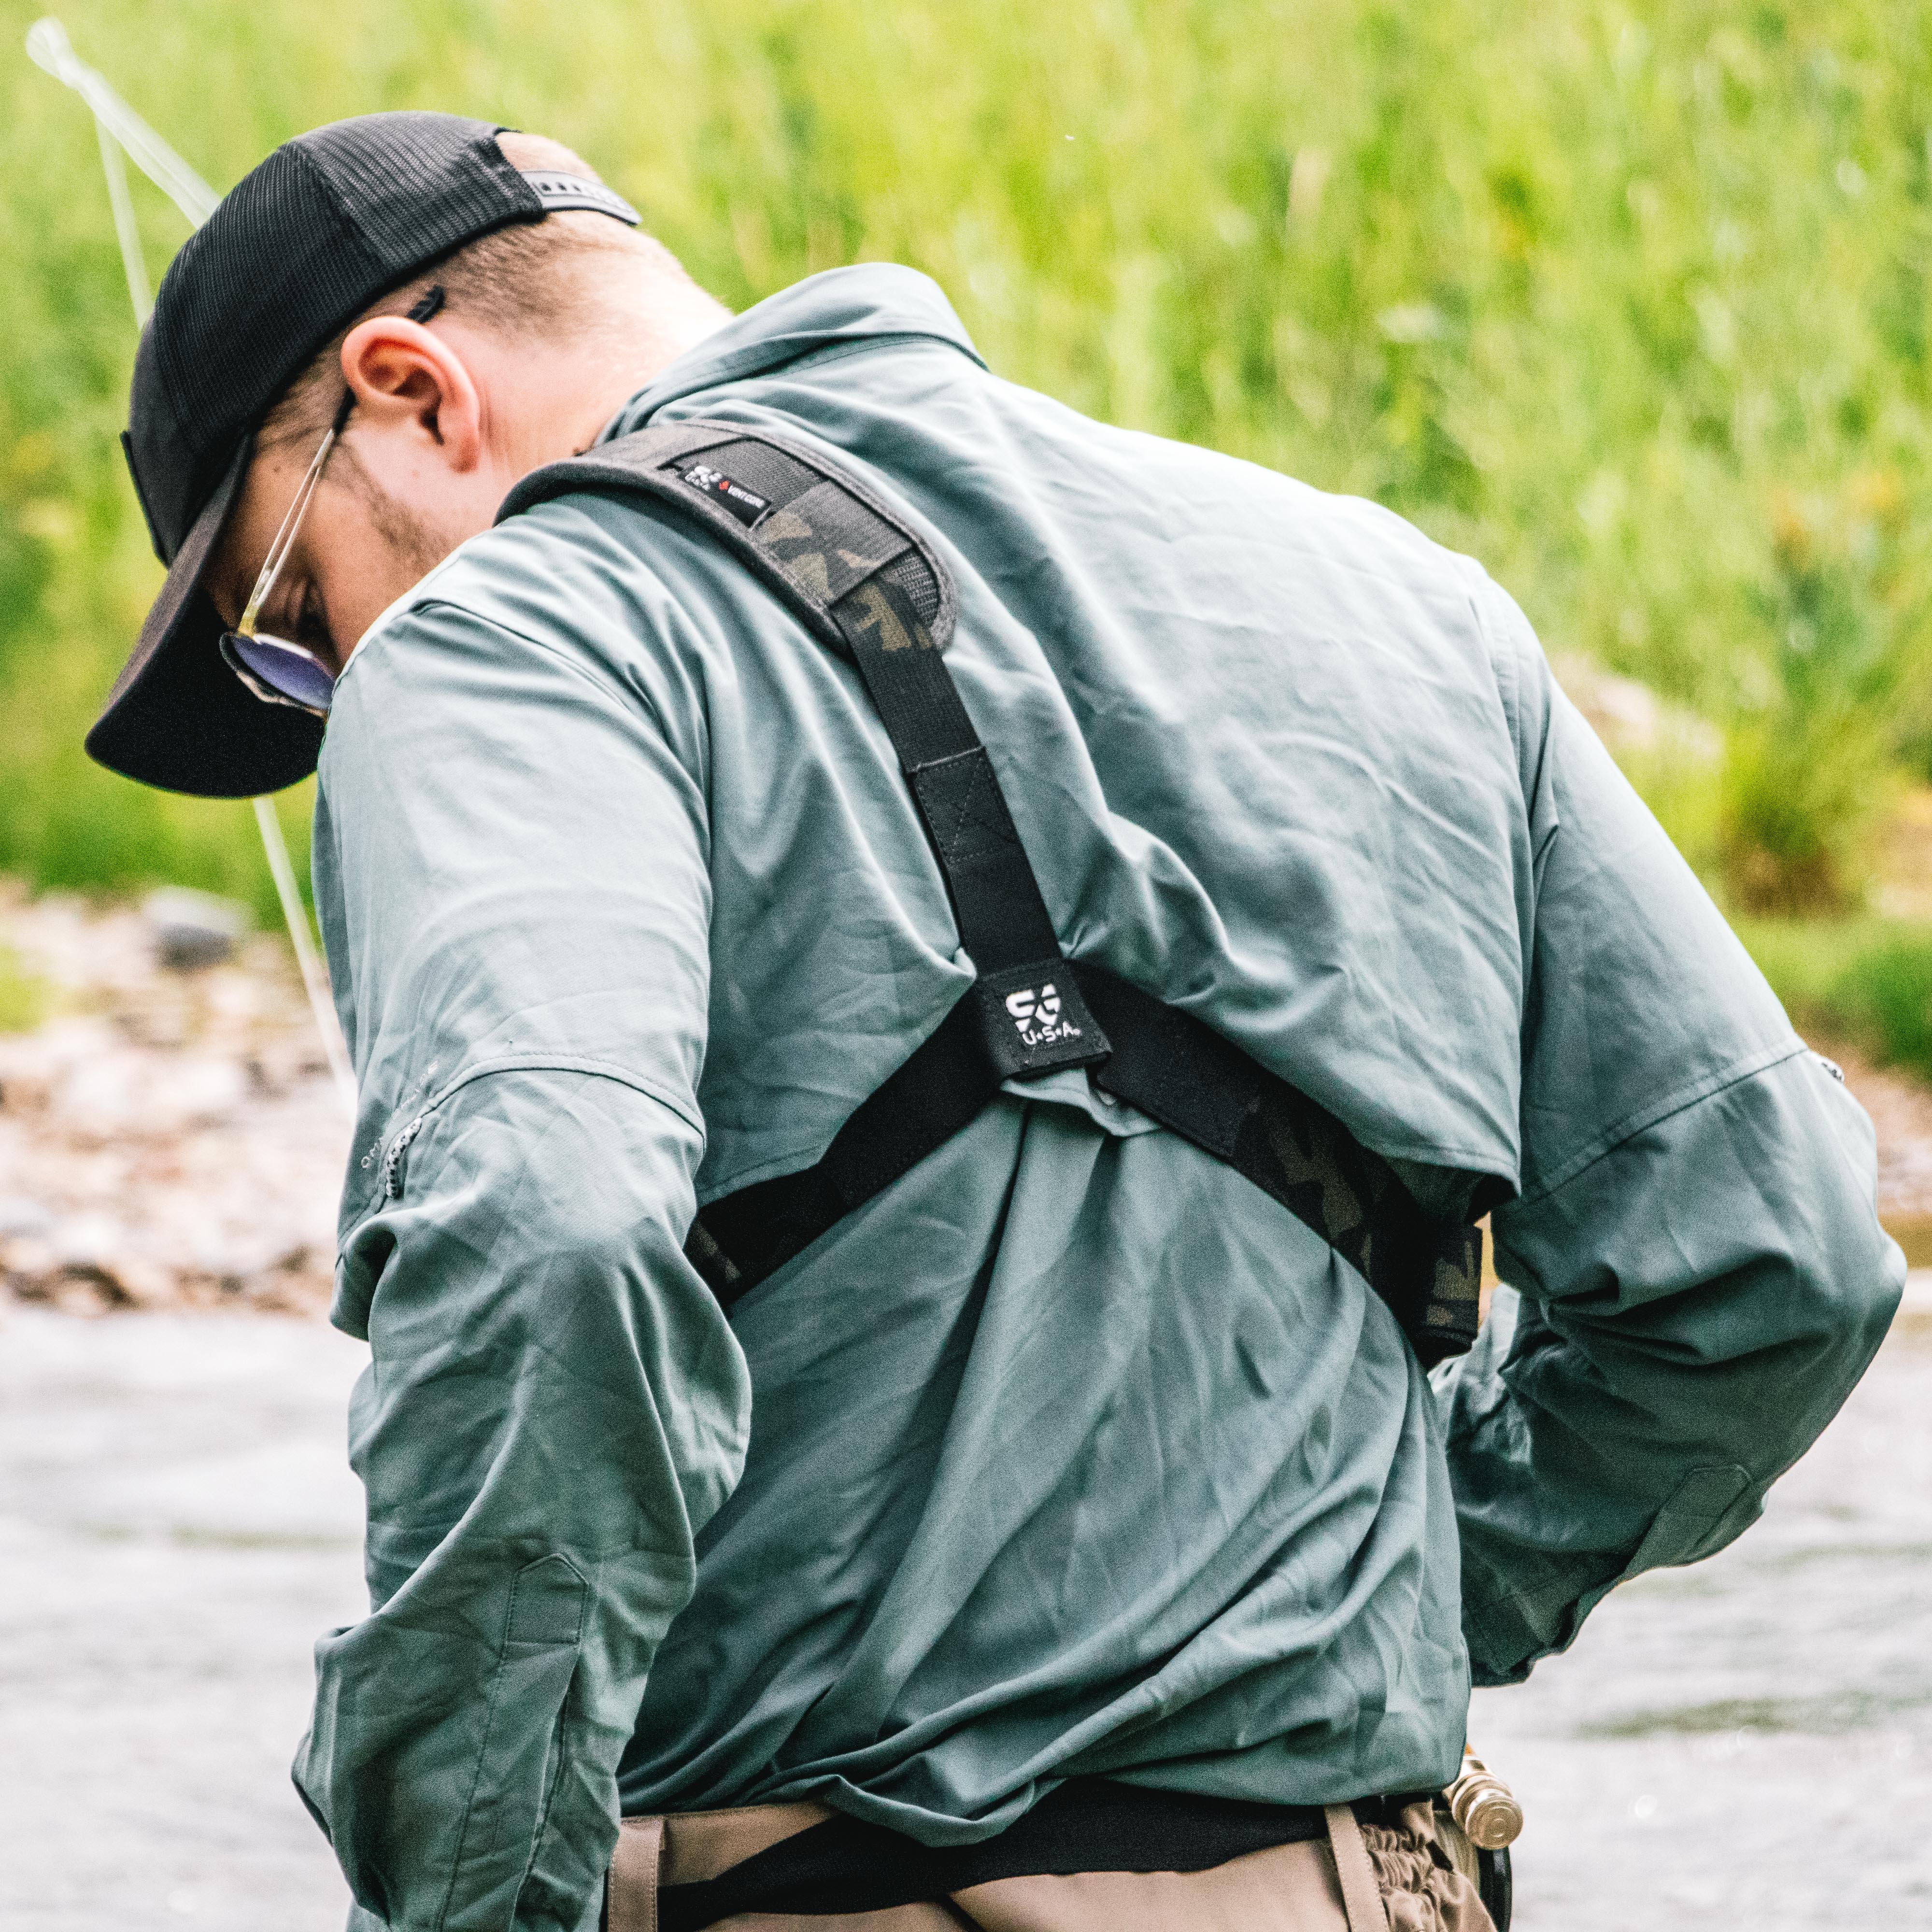 Fly Fishing with a Chest Holster - StealthGearUSA Chest Holster Review ...